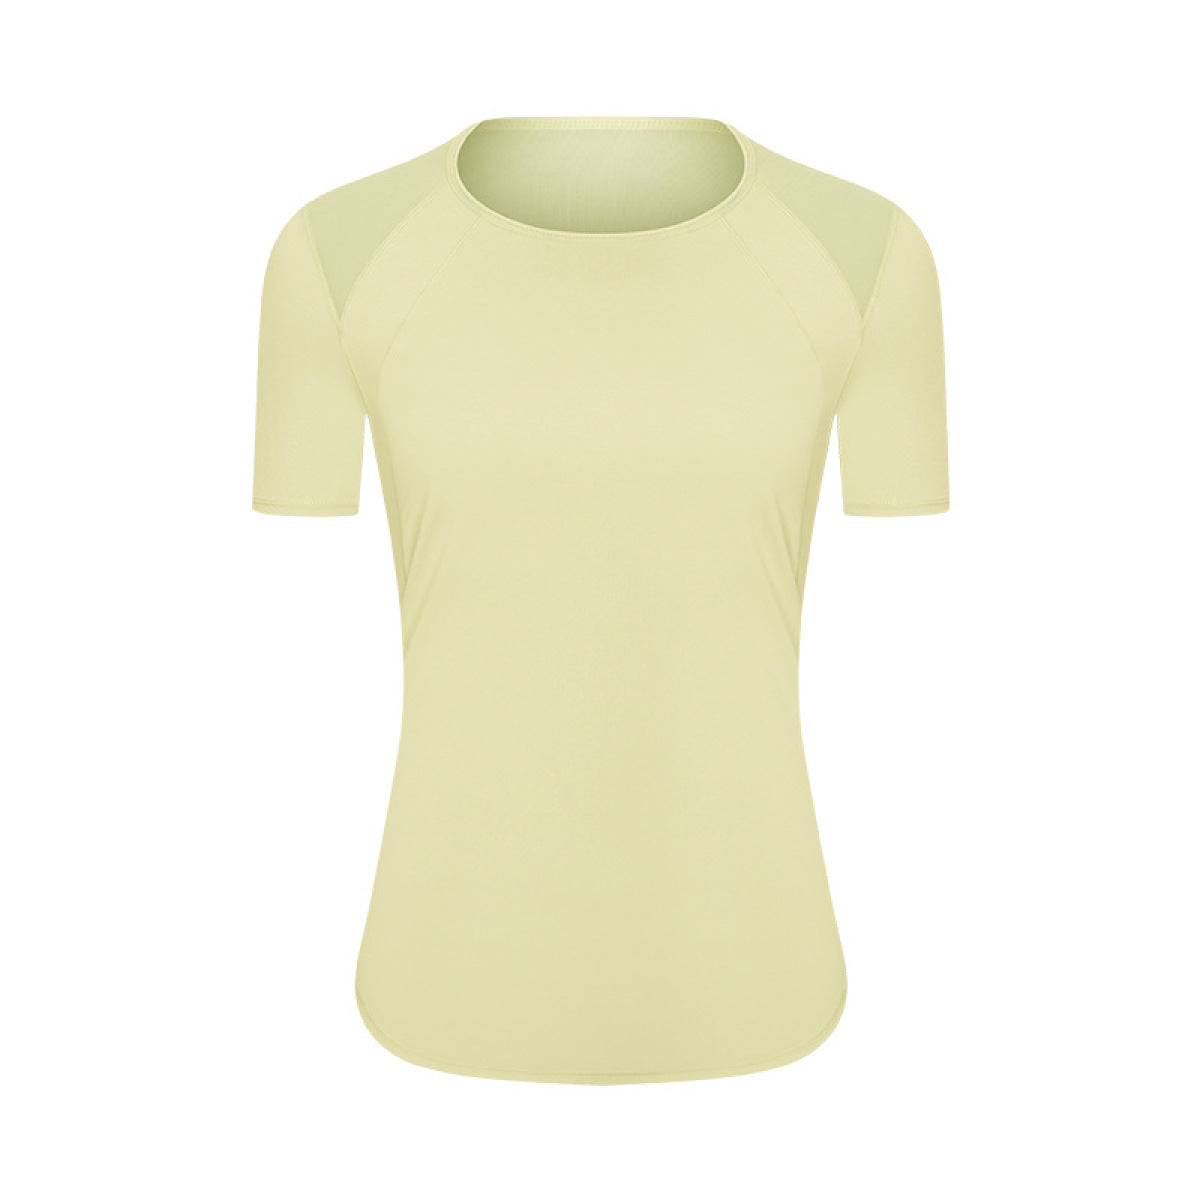 Mesh Splicing Cut Out Fast Dry Active Top